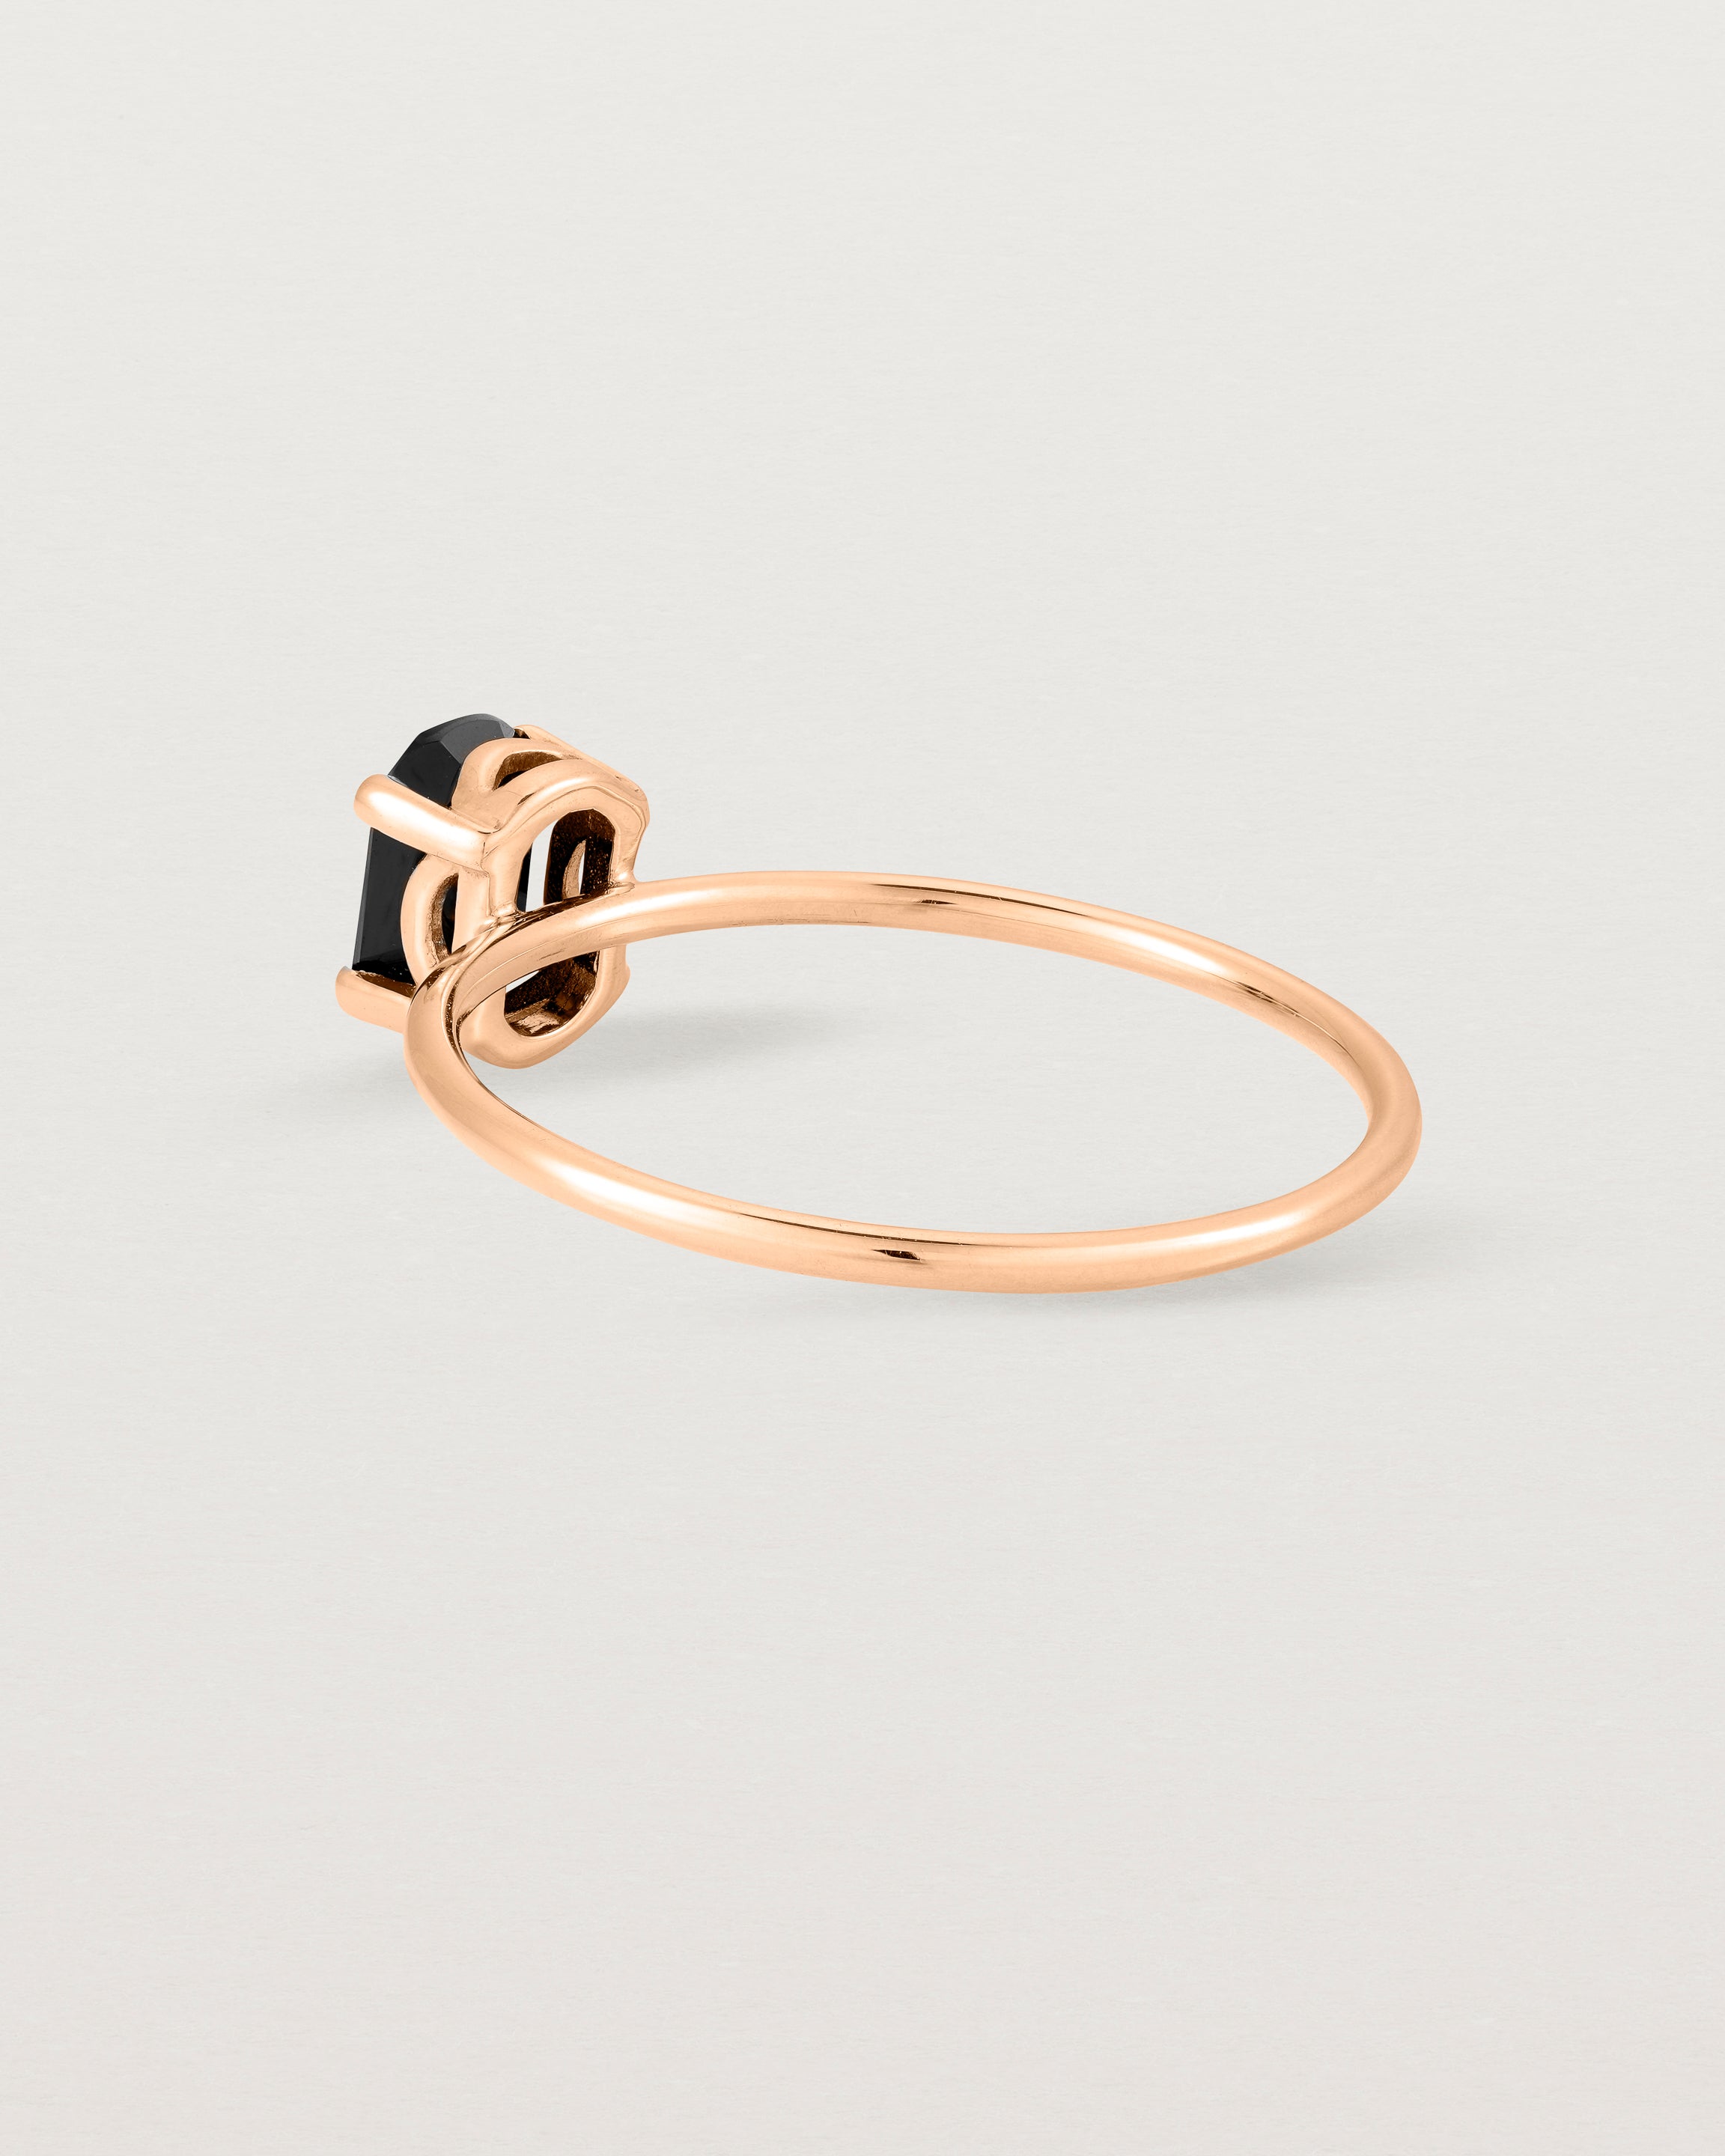 Fine rose gold band featuring an oval black spinel stone